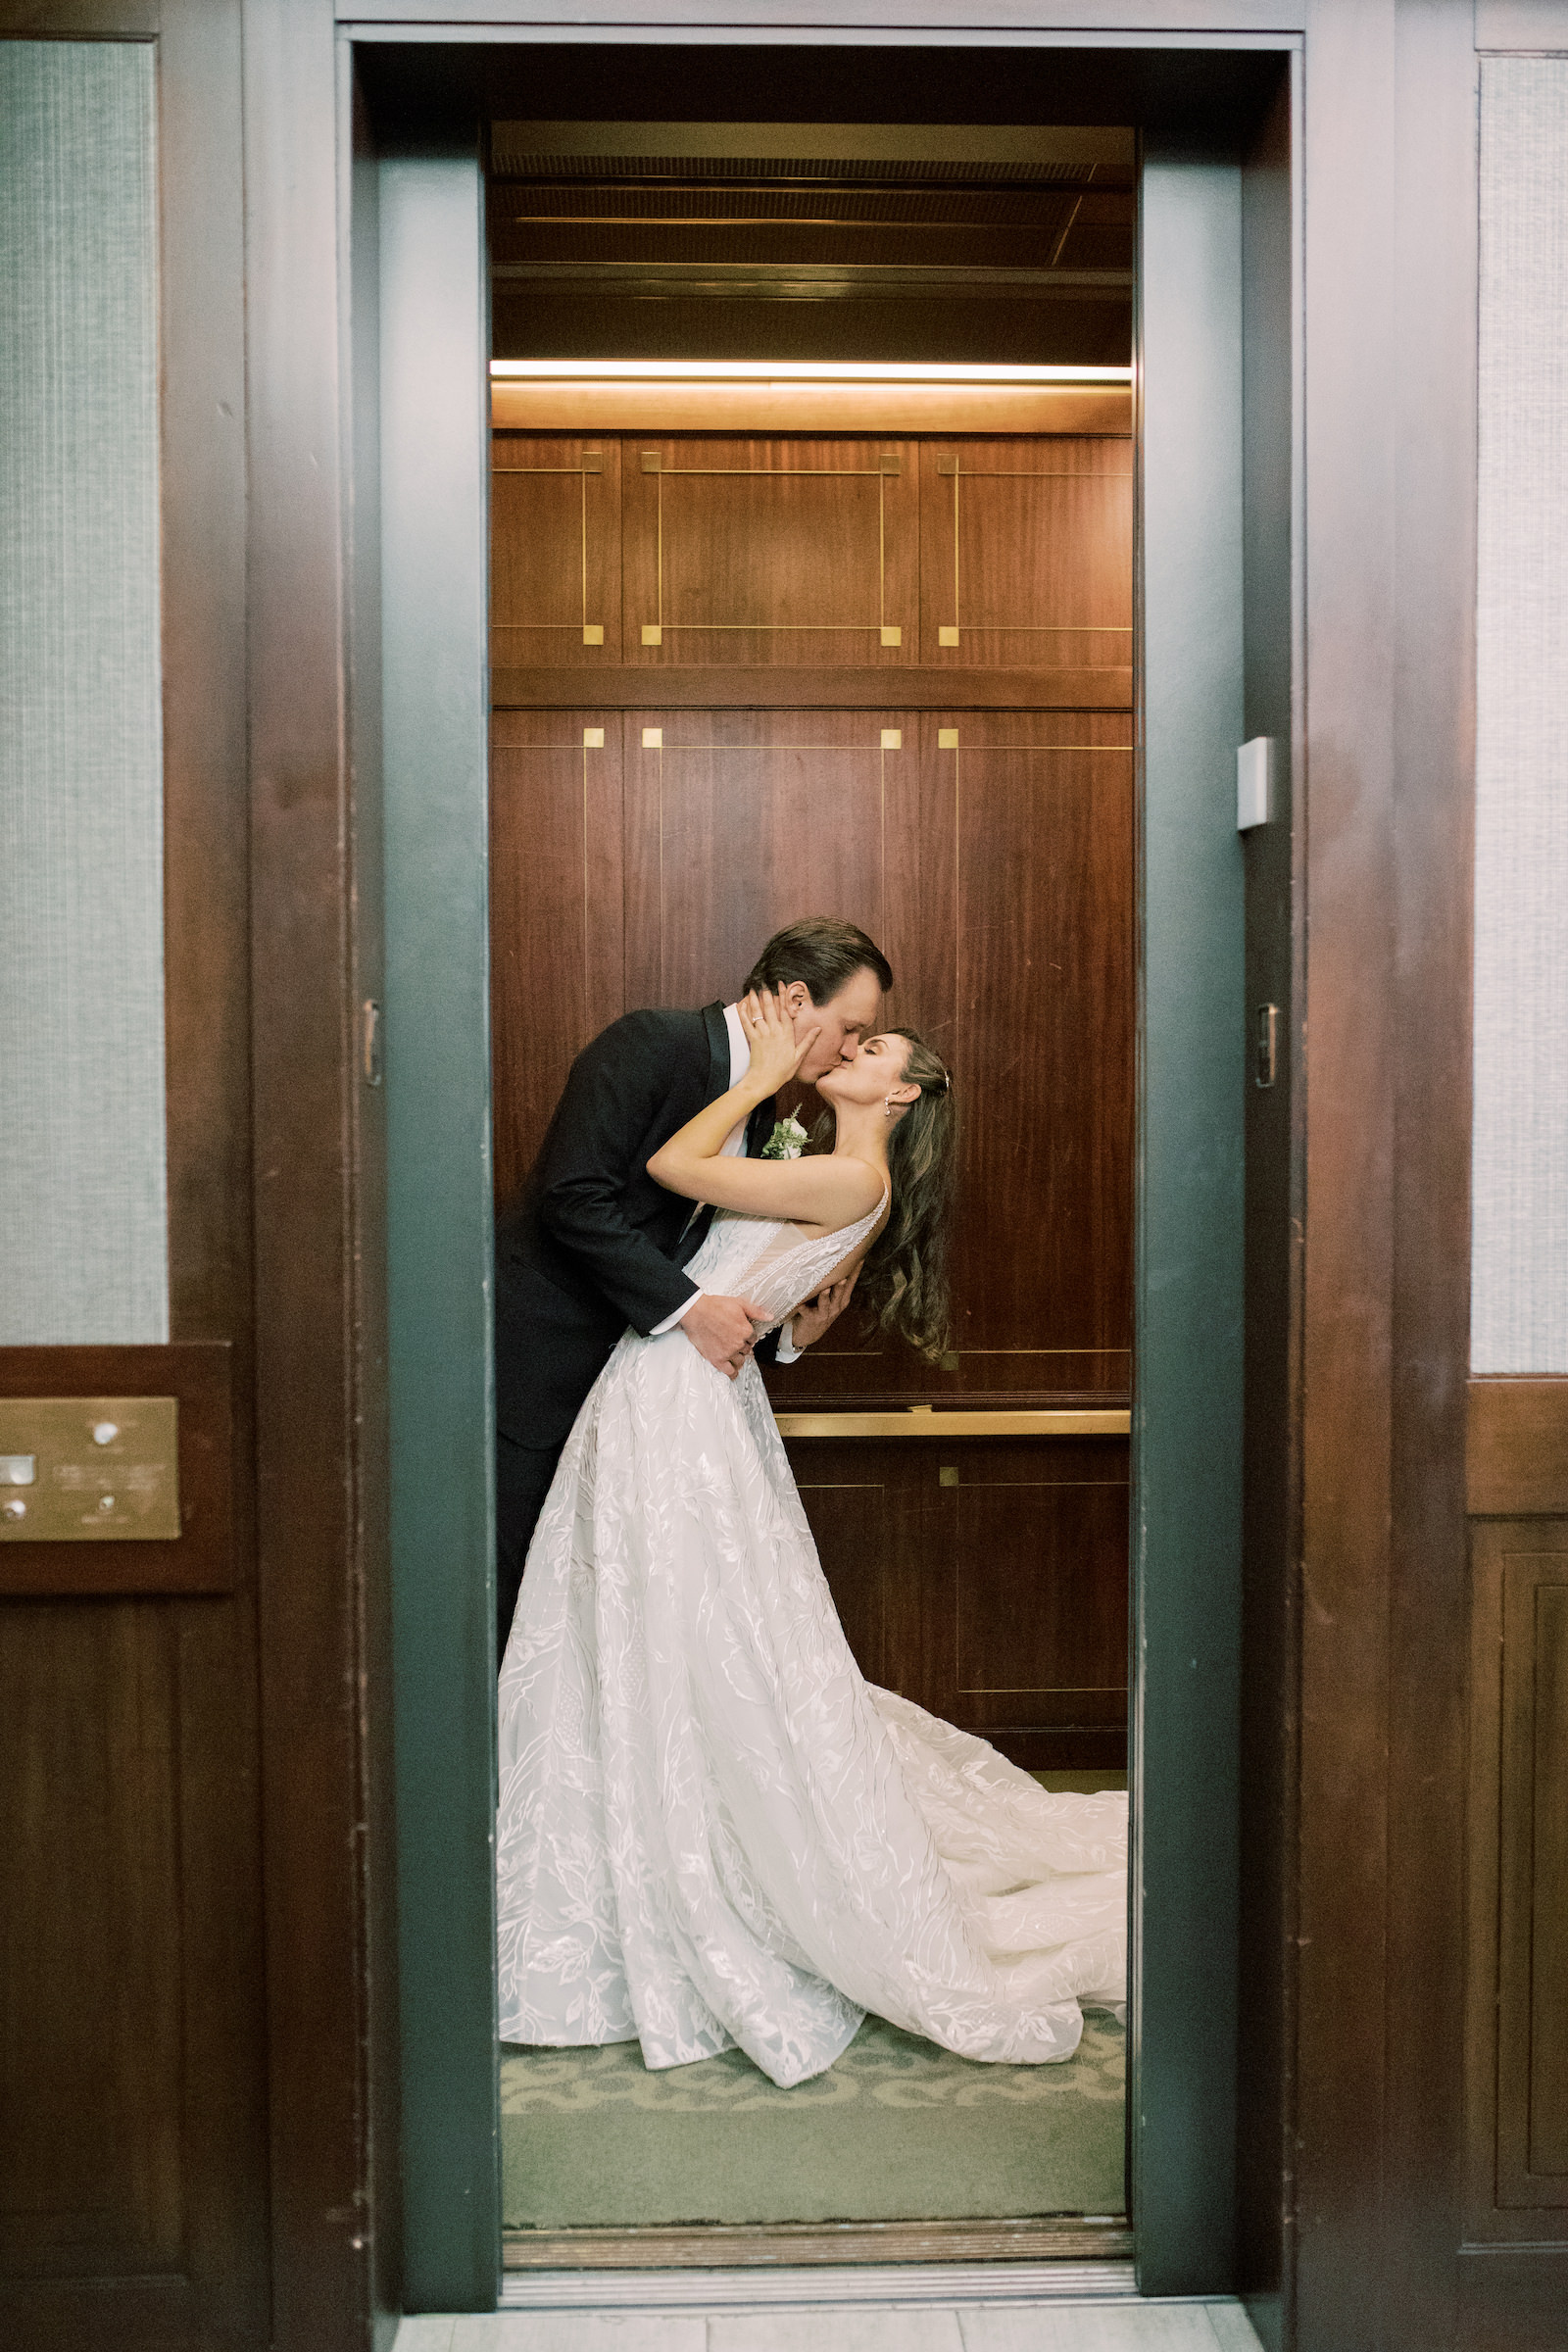 Indoor Bride and Groom Portrait at Downtown Tampa Wedding Venue The Tampa Club Elevator | V Neck Embroidered Illusion Panel Allure Couture Designer Wedding Dress Bridal Gown | Groom in Classic Black Suit Tux with Bow Tie